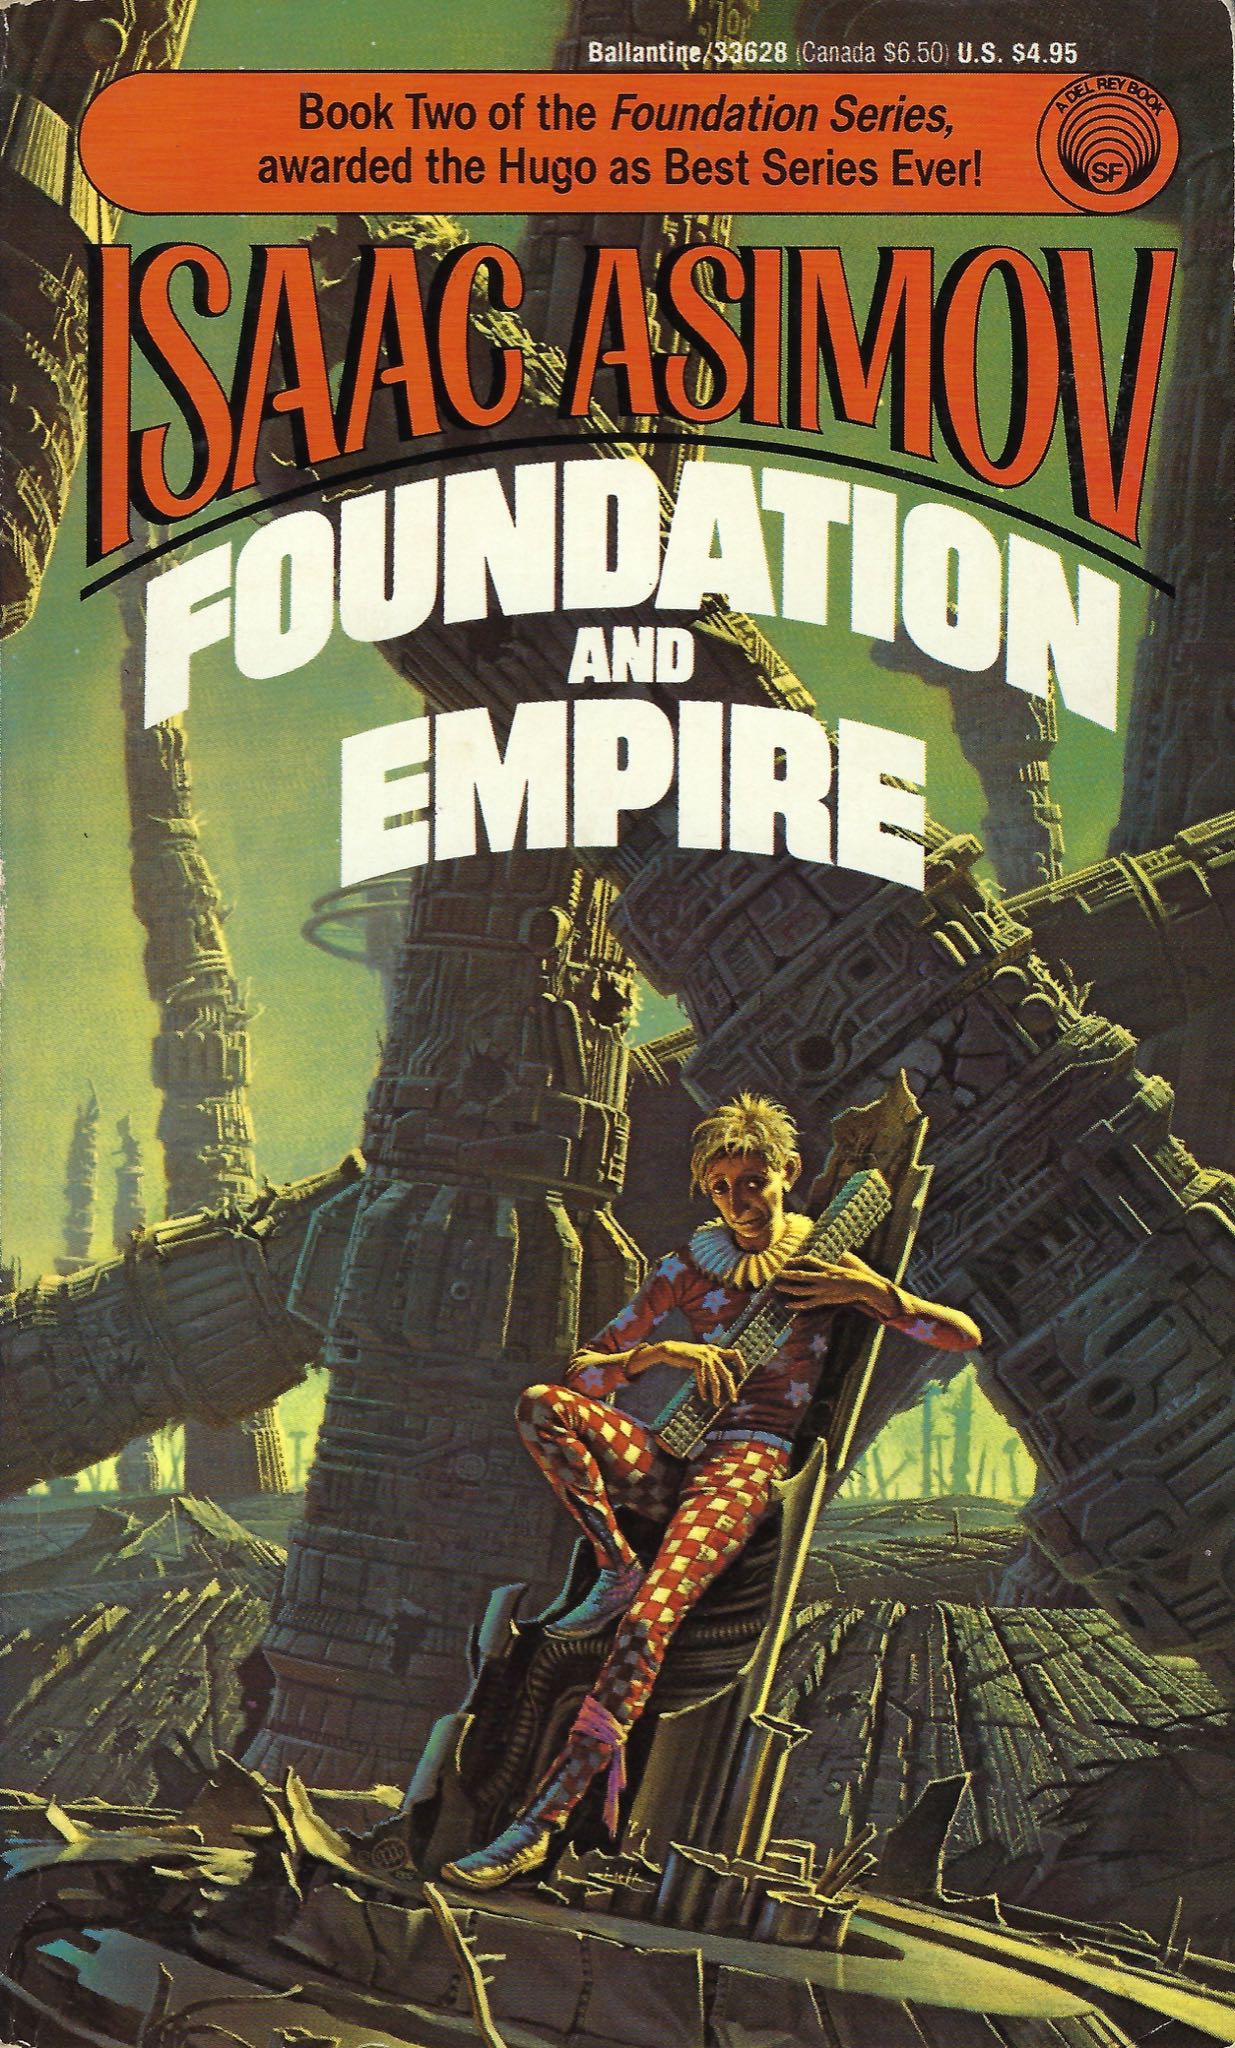 second foundation book